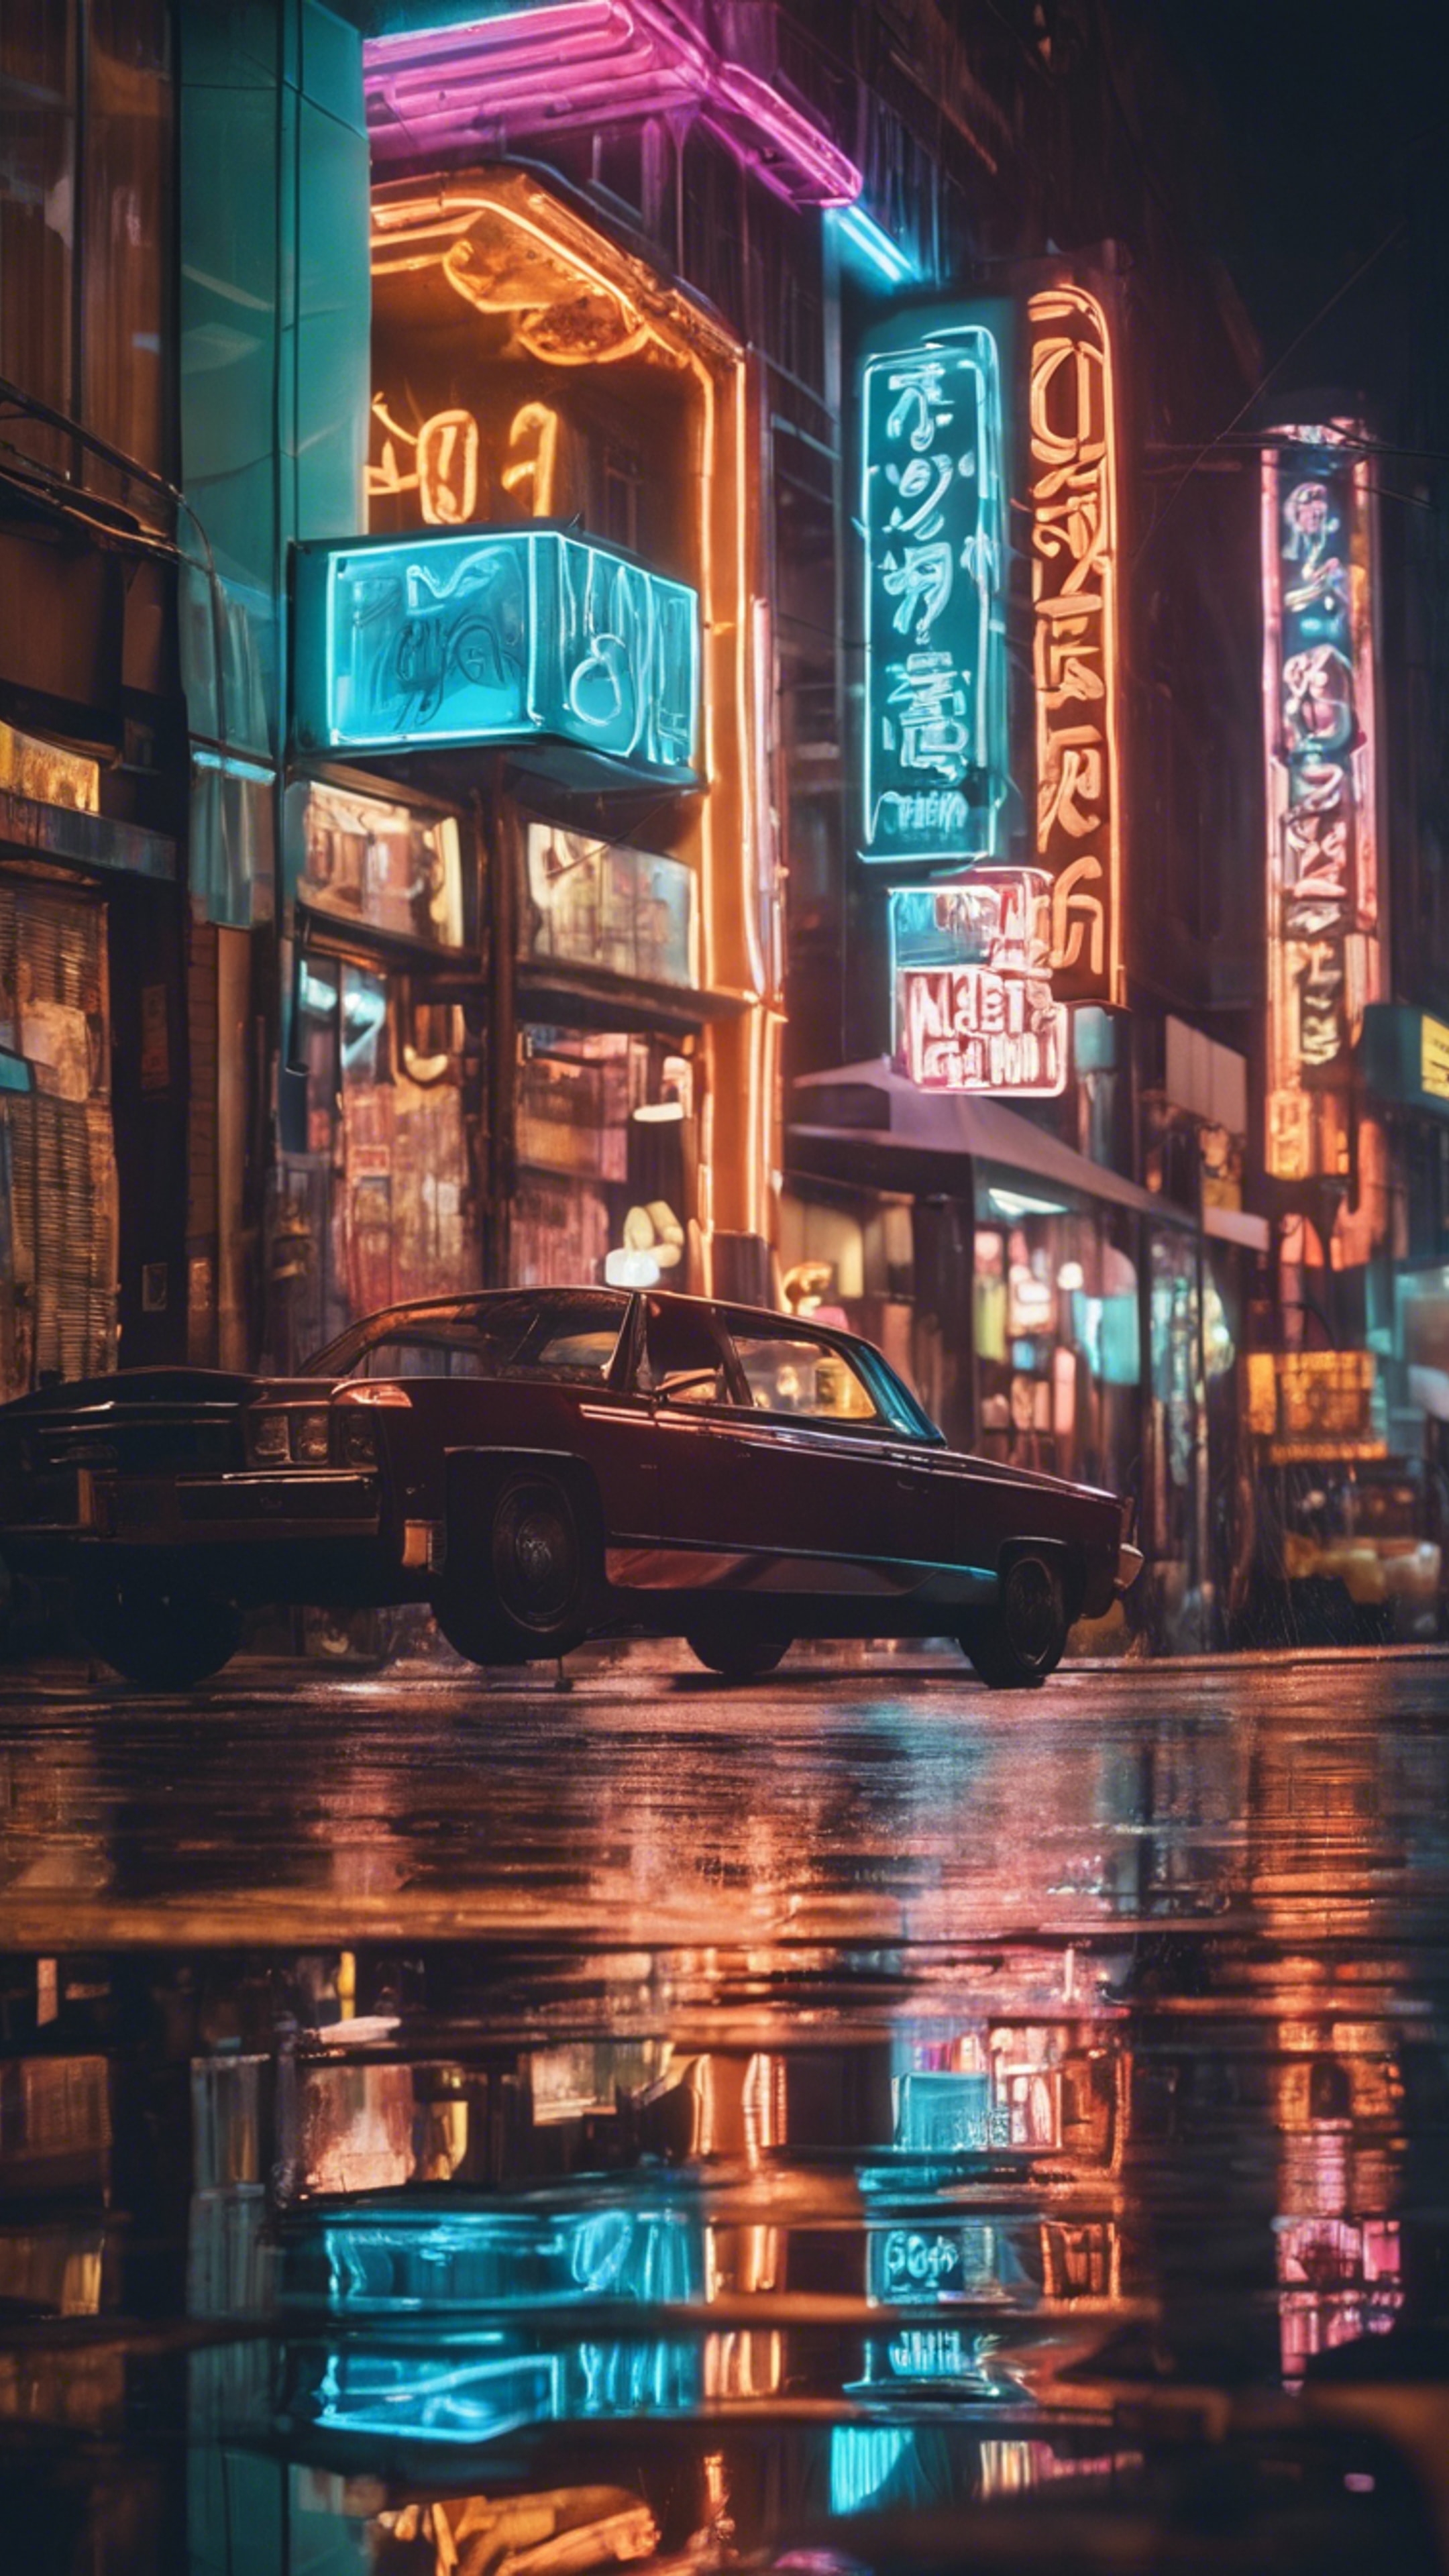 A dream vision of neon signs reflected on wet city streets at night. Tapet[79232e509baa4ed0a24c]